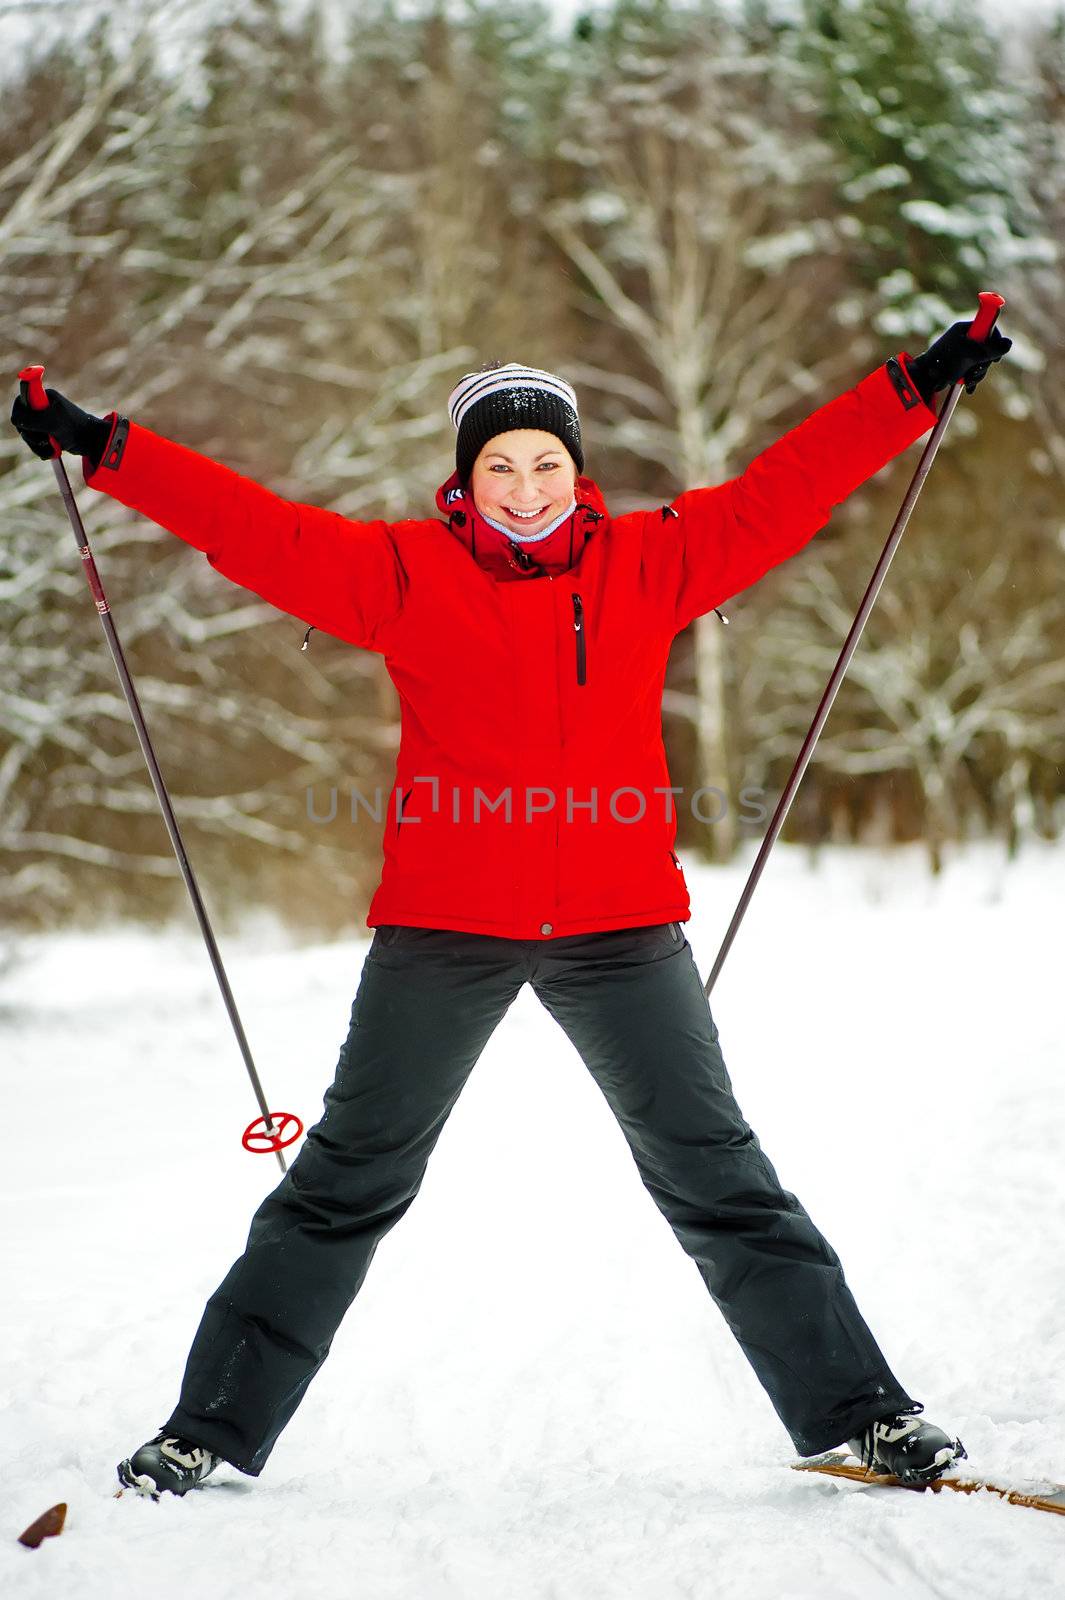 Happy girl posing on skis in the winter woods.